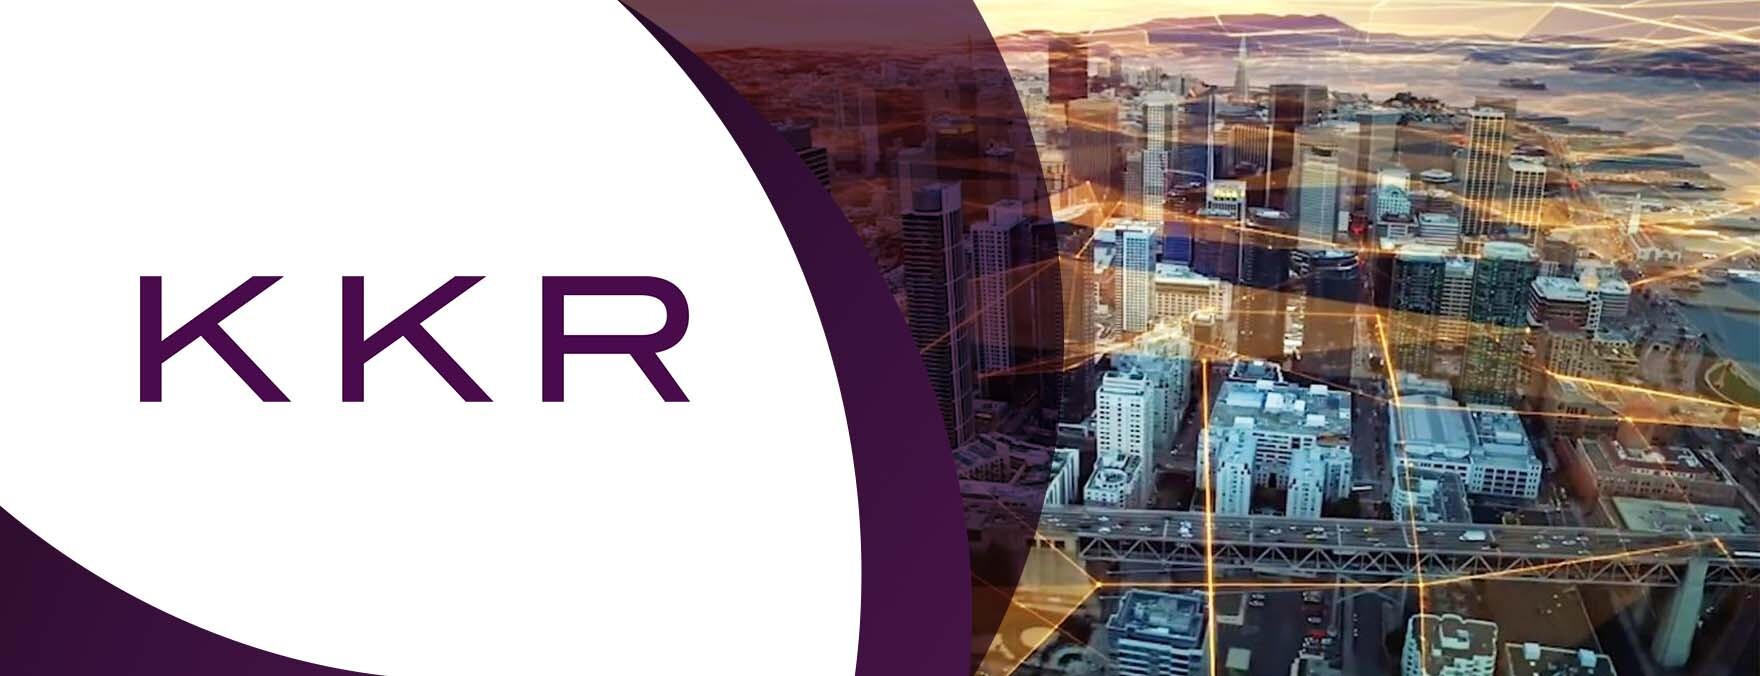 KKR's logo against a white background with purple curves pasted over a background of a metropolis with orange light rays moving between the buildings